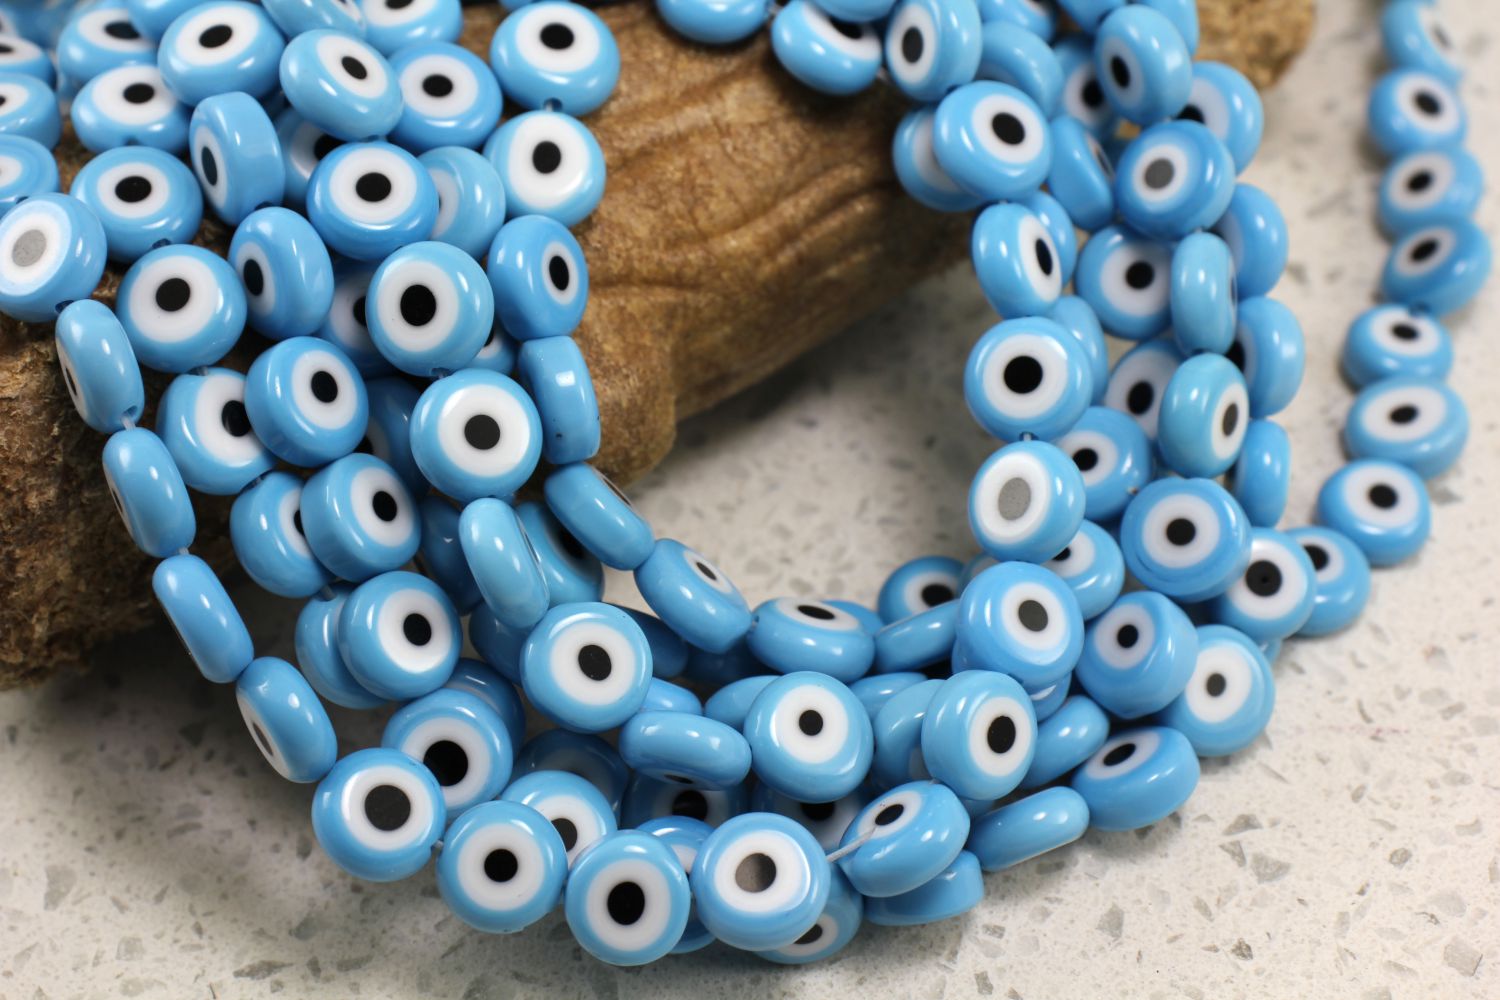 10mm Flat Round Turquoise Glass Evil Eye Beads